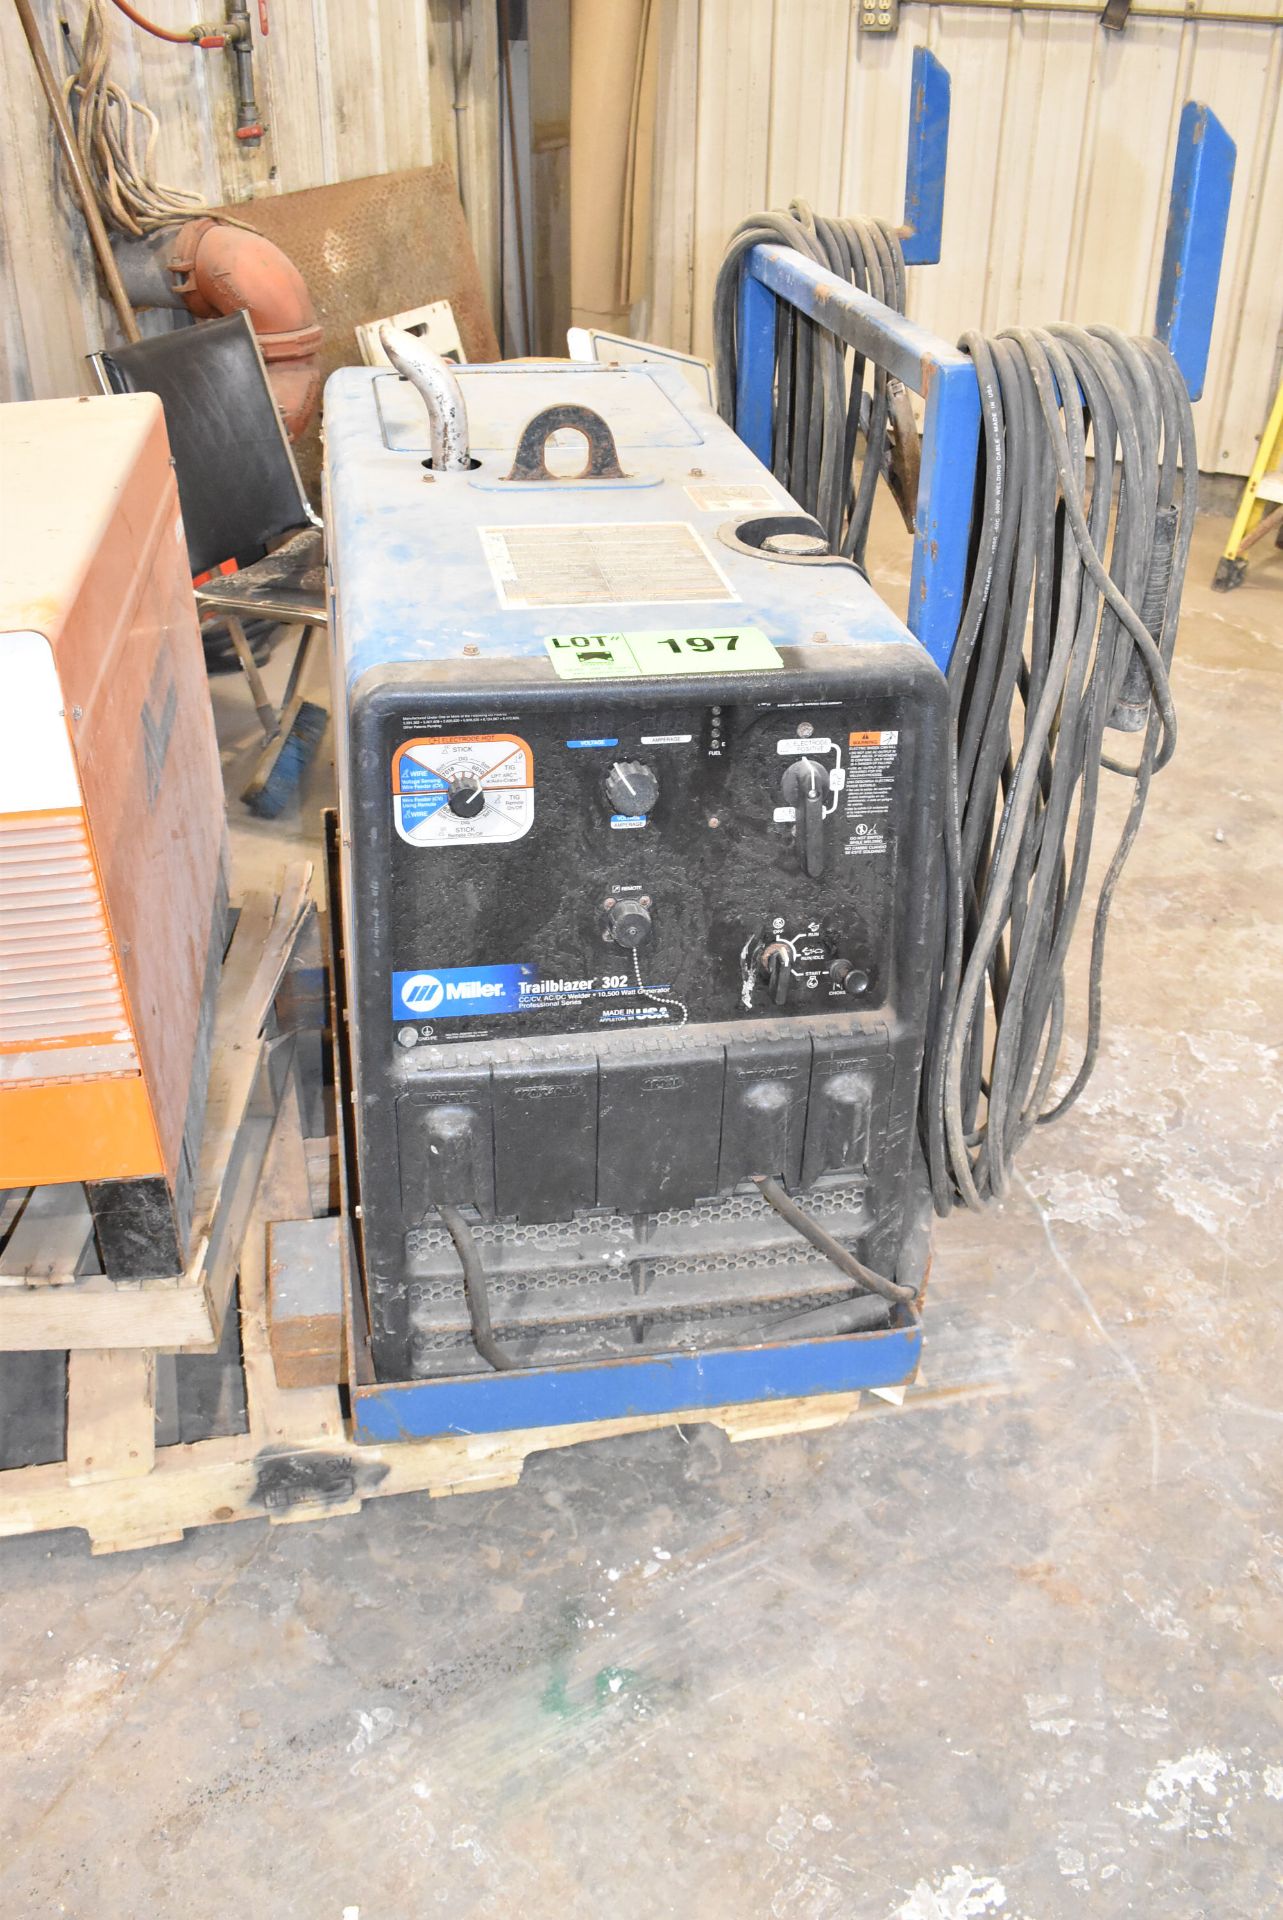 MILLER TRAILBLAZER 302 GAS POWERED CC/CV, AC/DC WELDER WITH 10,500 WATT GENERATOR WITH CABLES AND